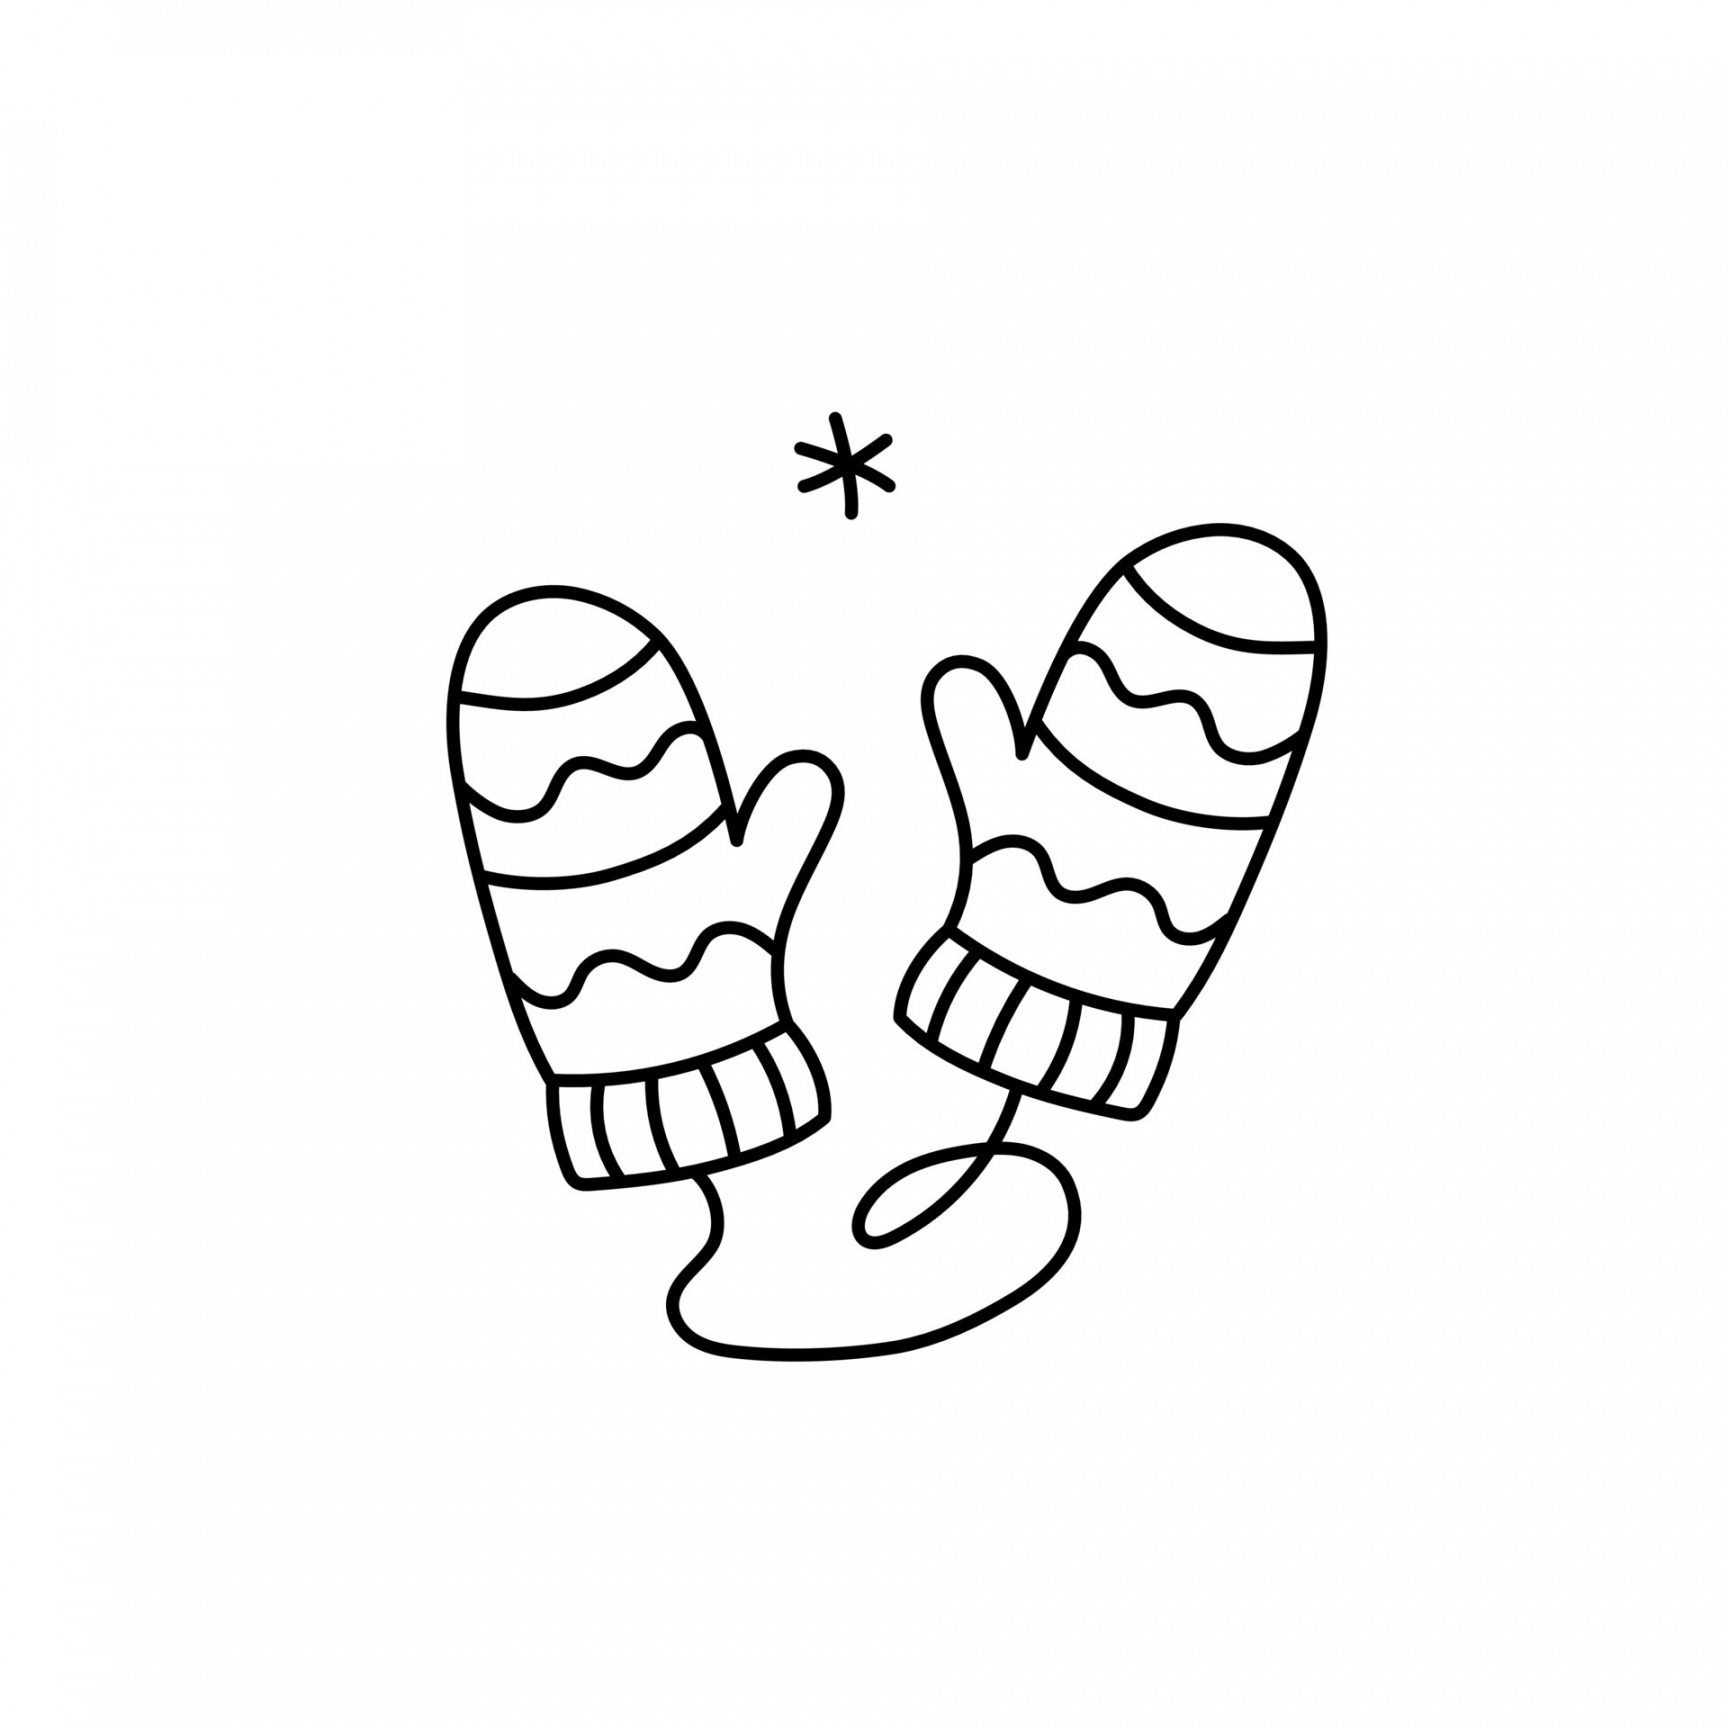 Mittens Winter Outline Doodle Icon - Mittens Outline